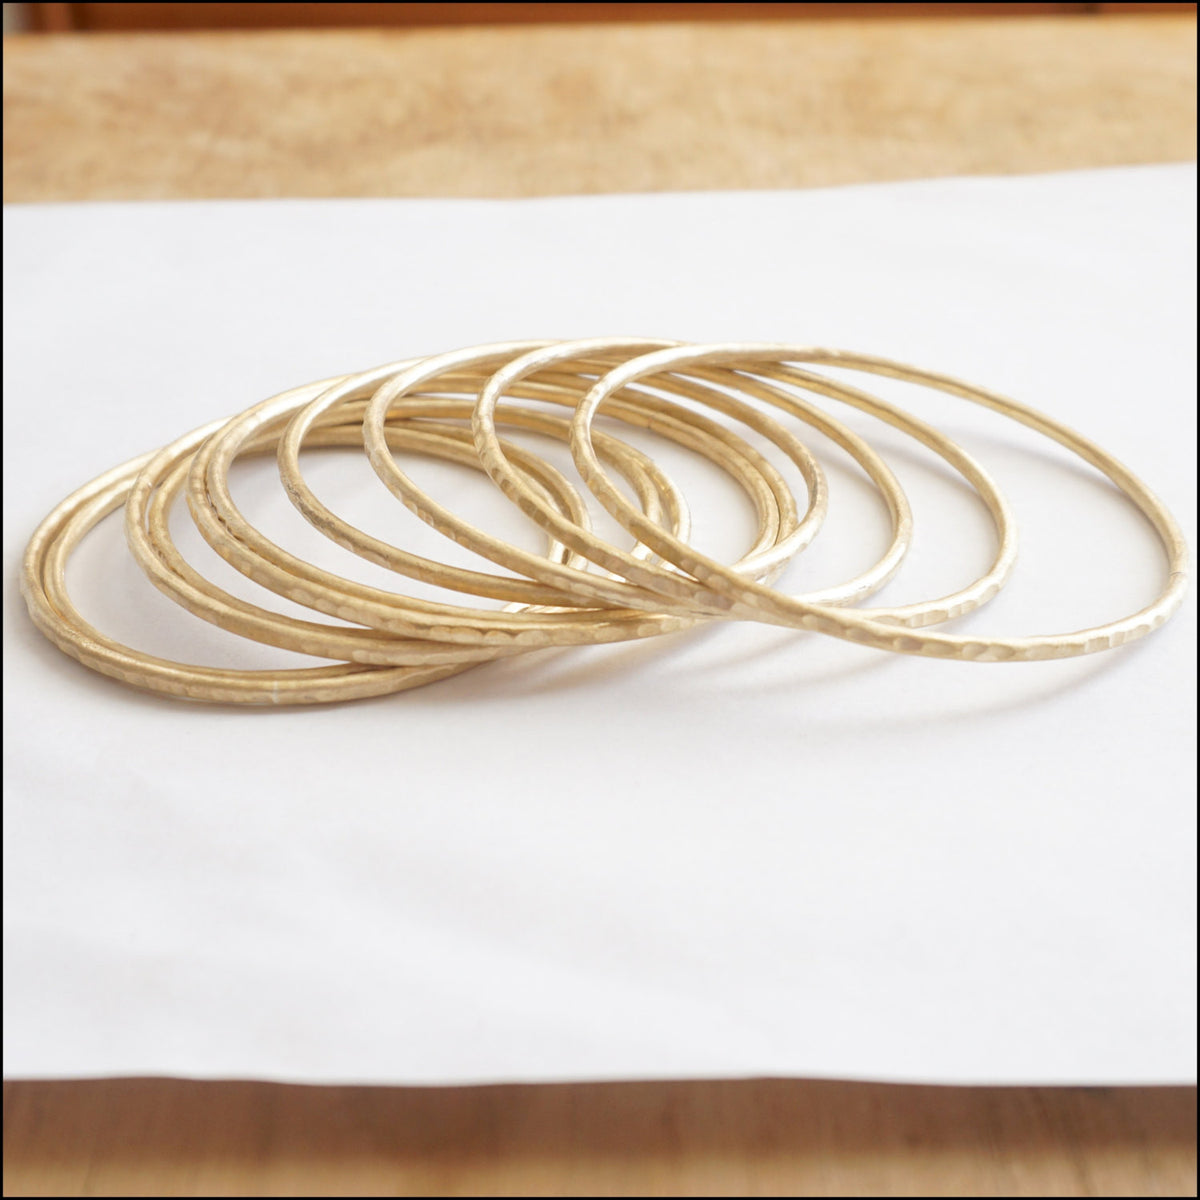 Classic Bohemian Bangle Bracelets, Hand-Made and Hand Textured - 0210 - Virginia Wynne Designs